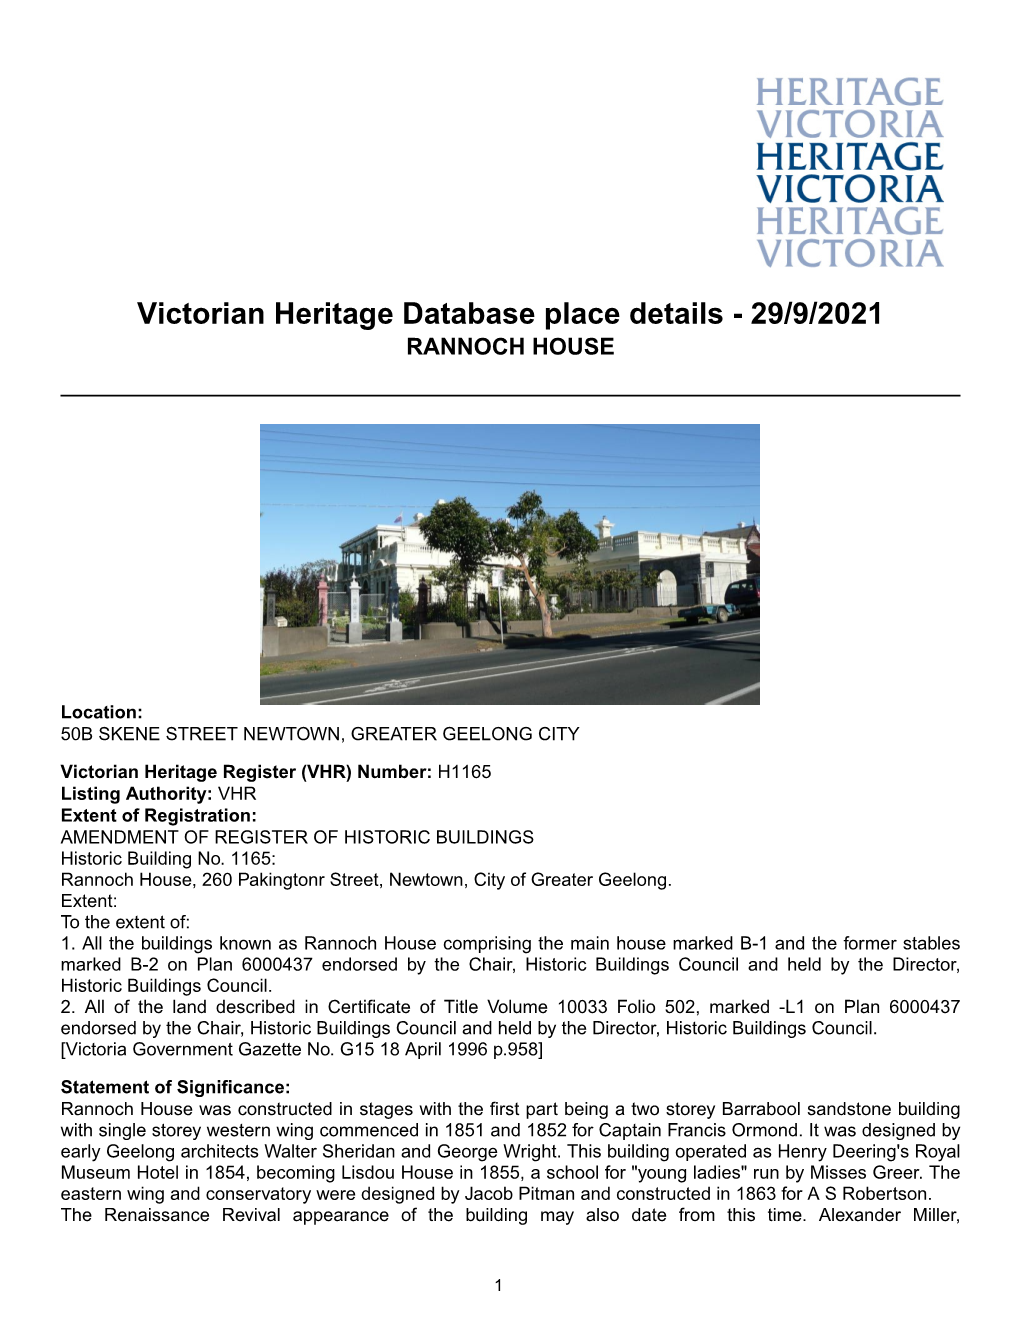 Victorian Heritage Database Place Details - 29/9/2021 RANNOCH HOUSE